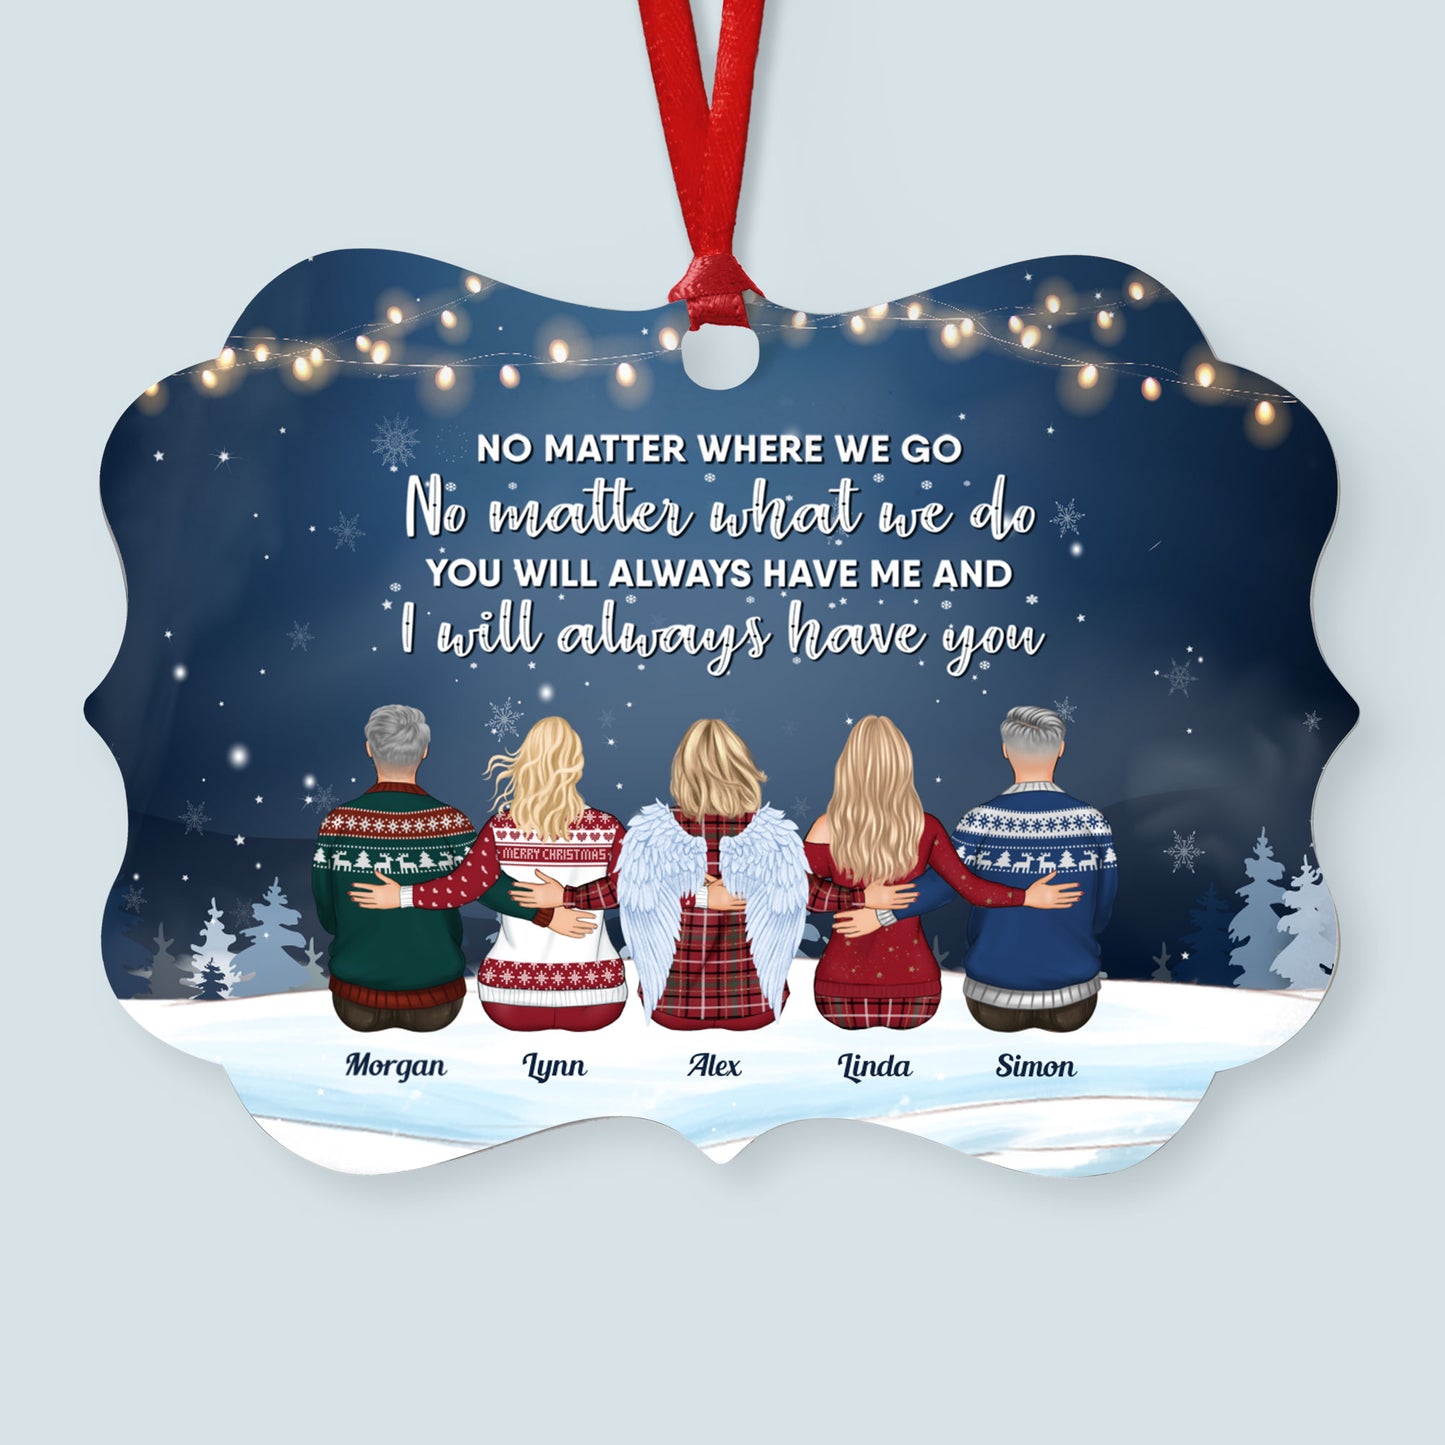 The Love Between Brothers & Sisters Is Forever - Personalized Aluminum Ornament - Family Hugging